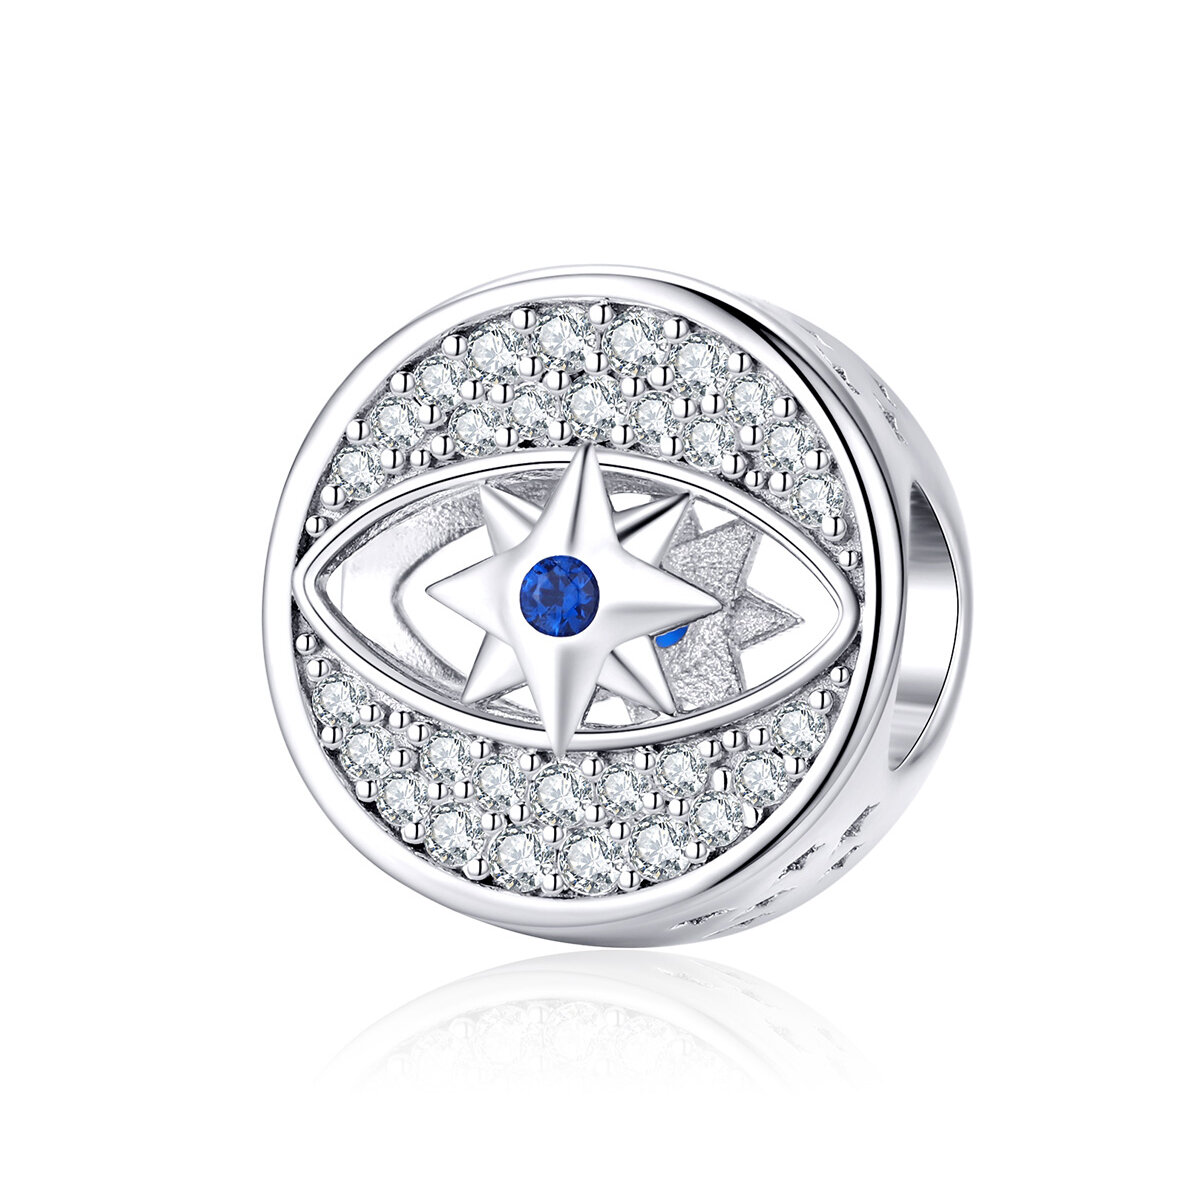 GemKing SCC1368 the Lucky Eye S925 Sterling Silver Charm